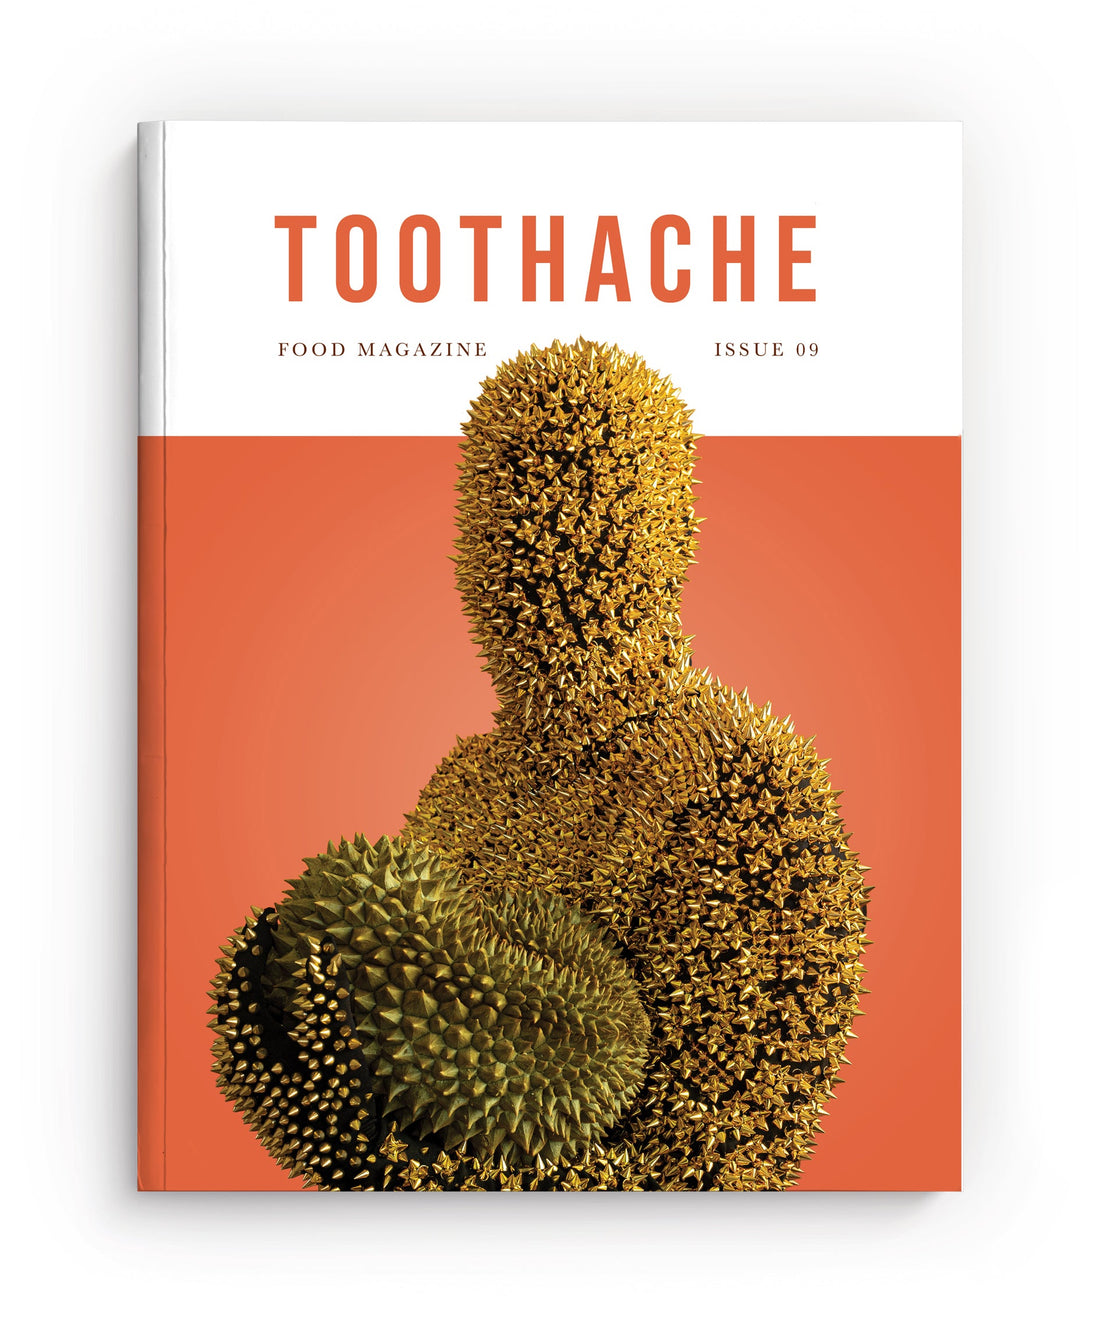 Toothache Issue 09